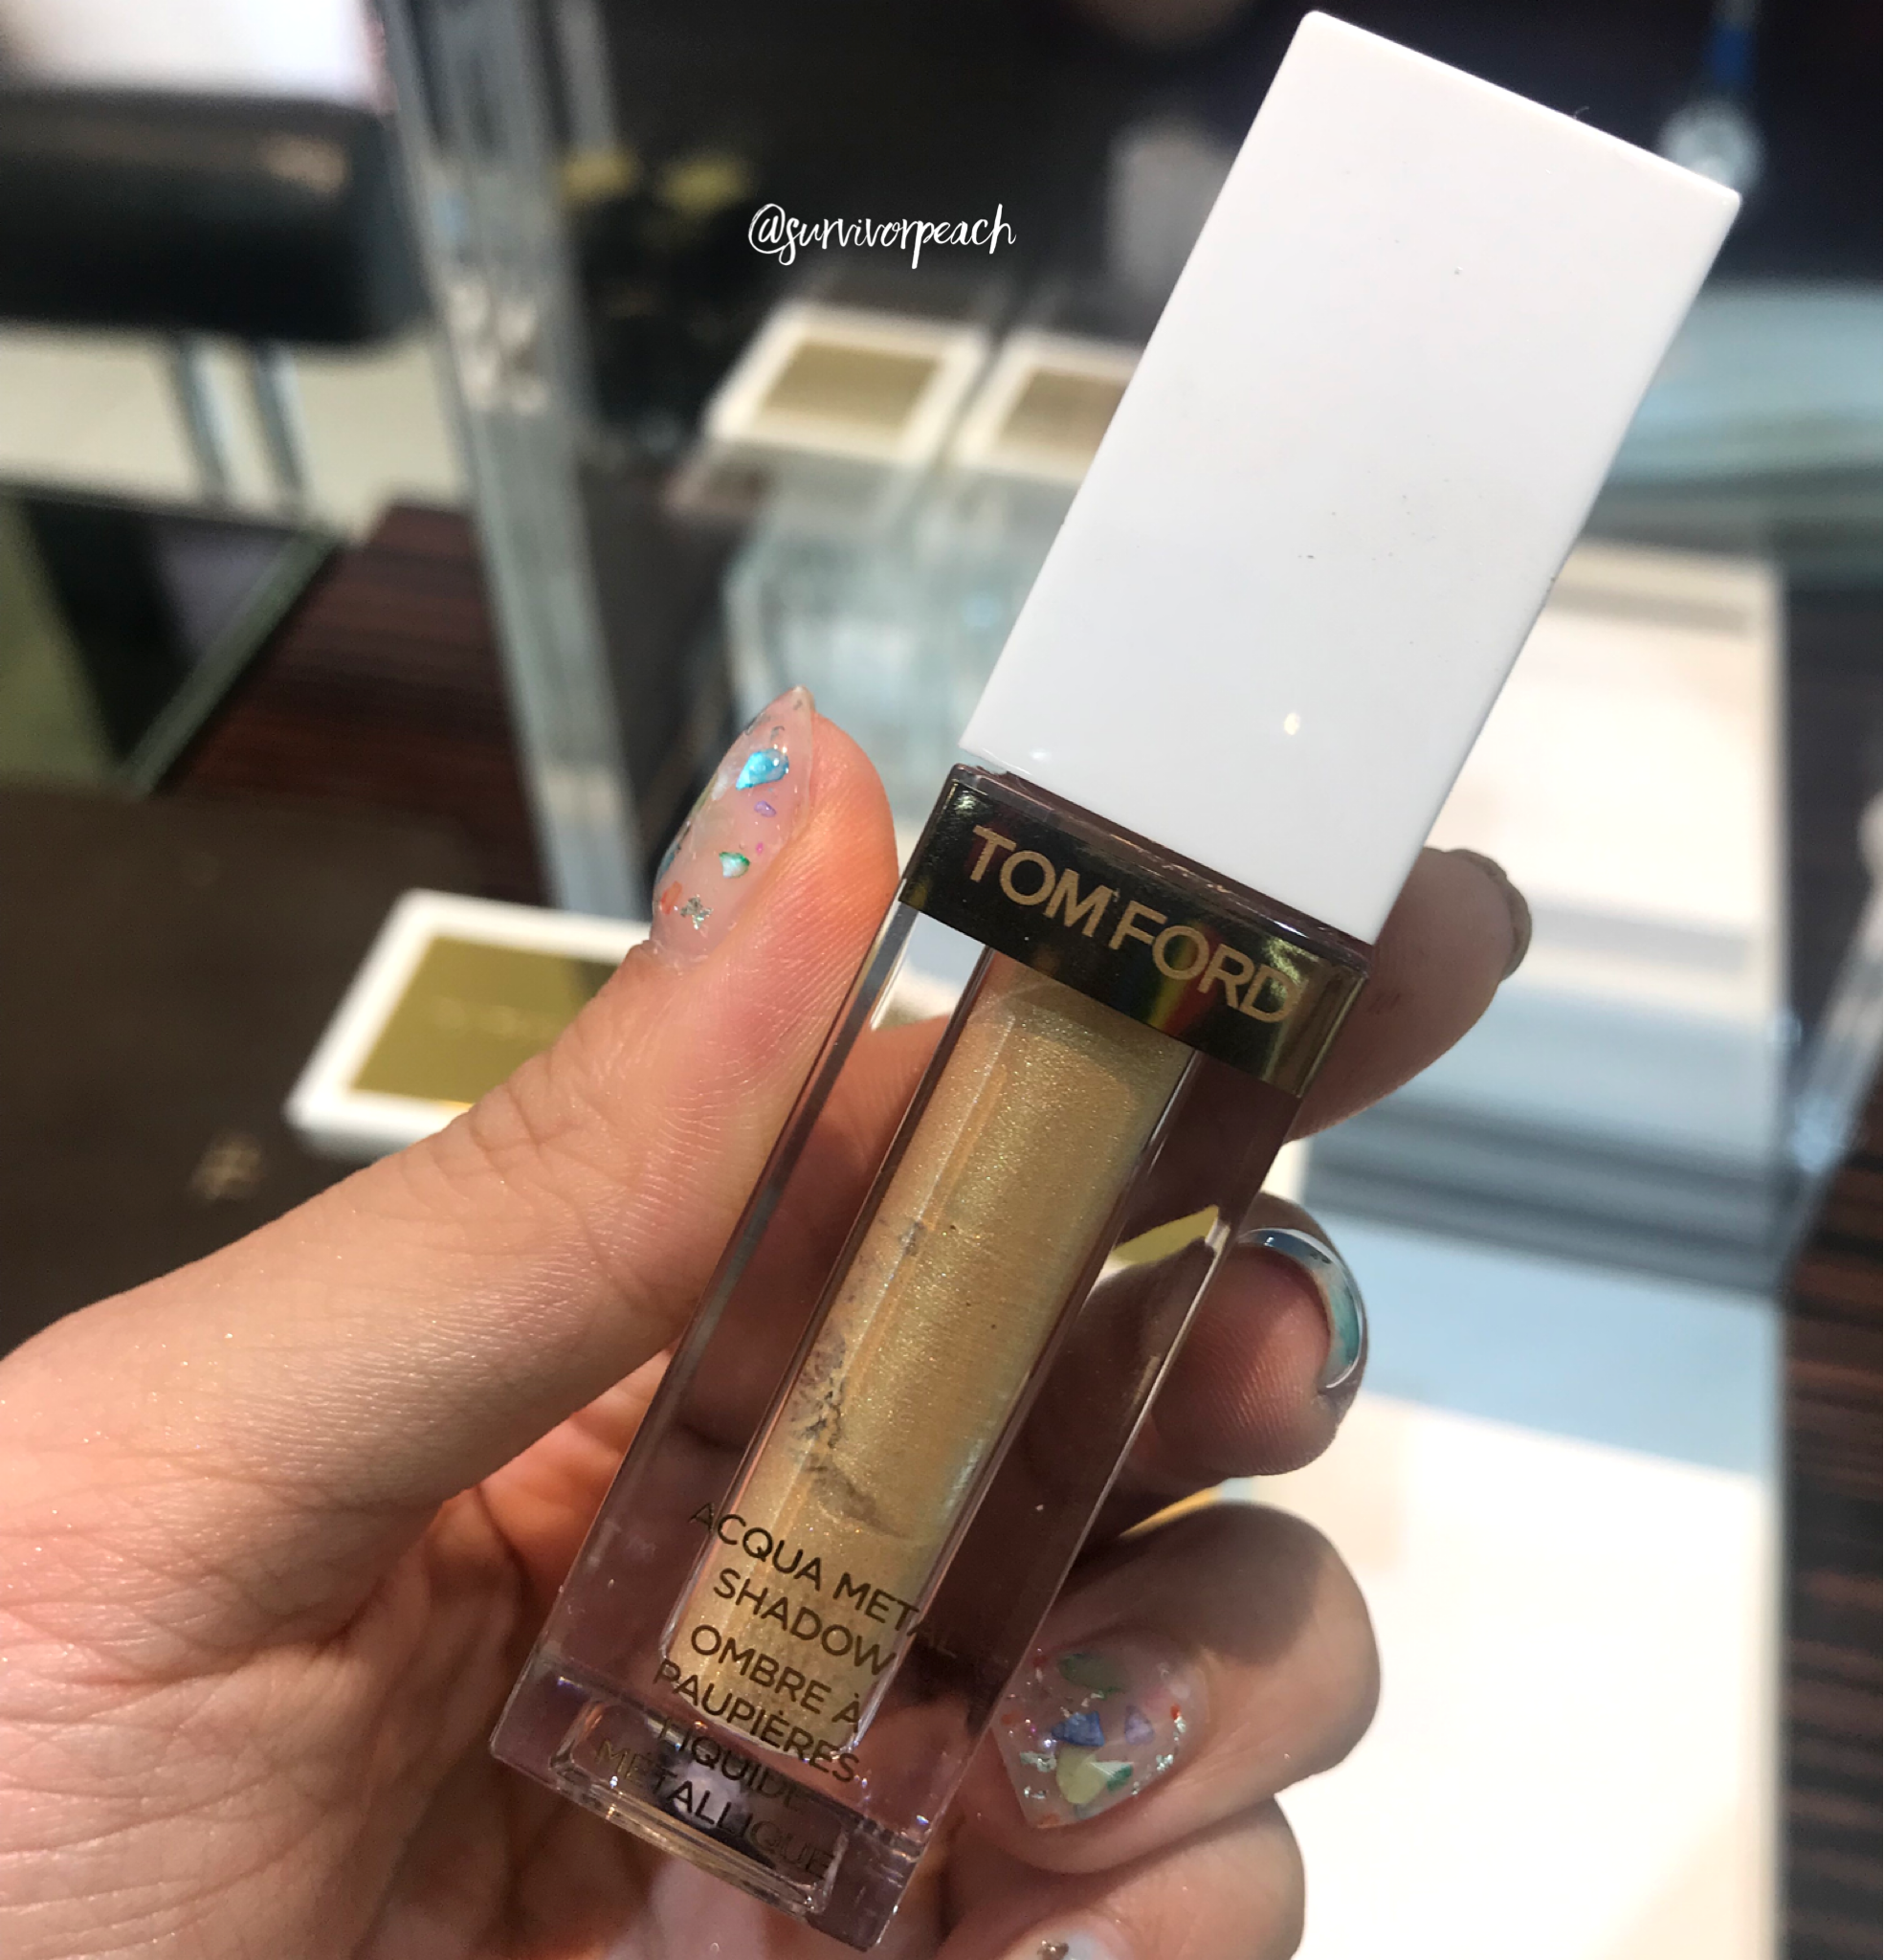 Tomford Acqua Metal Eyeshadow Review and swatches + 03 Bask Contouring  compact — Survivorpeach